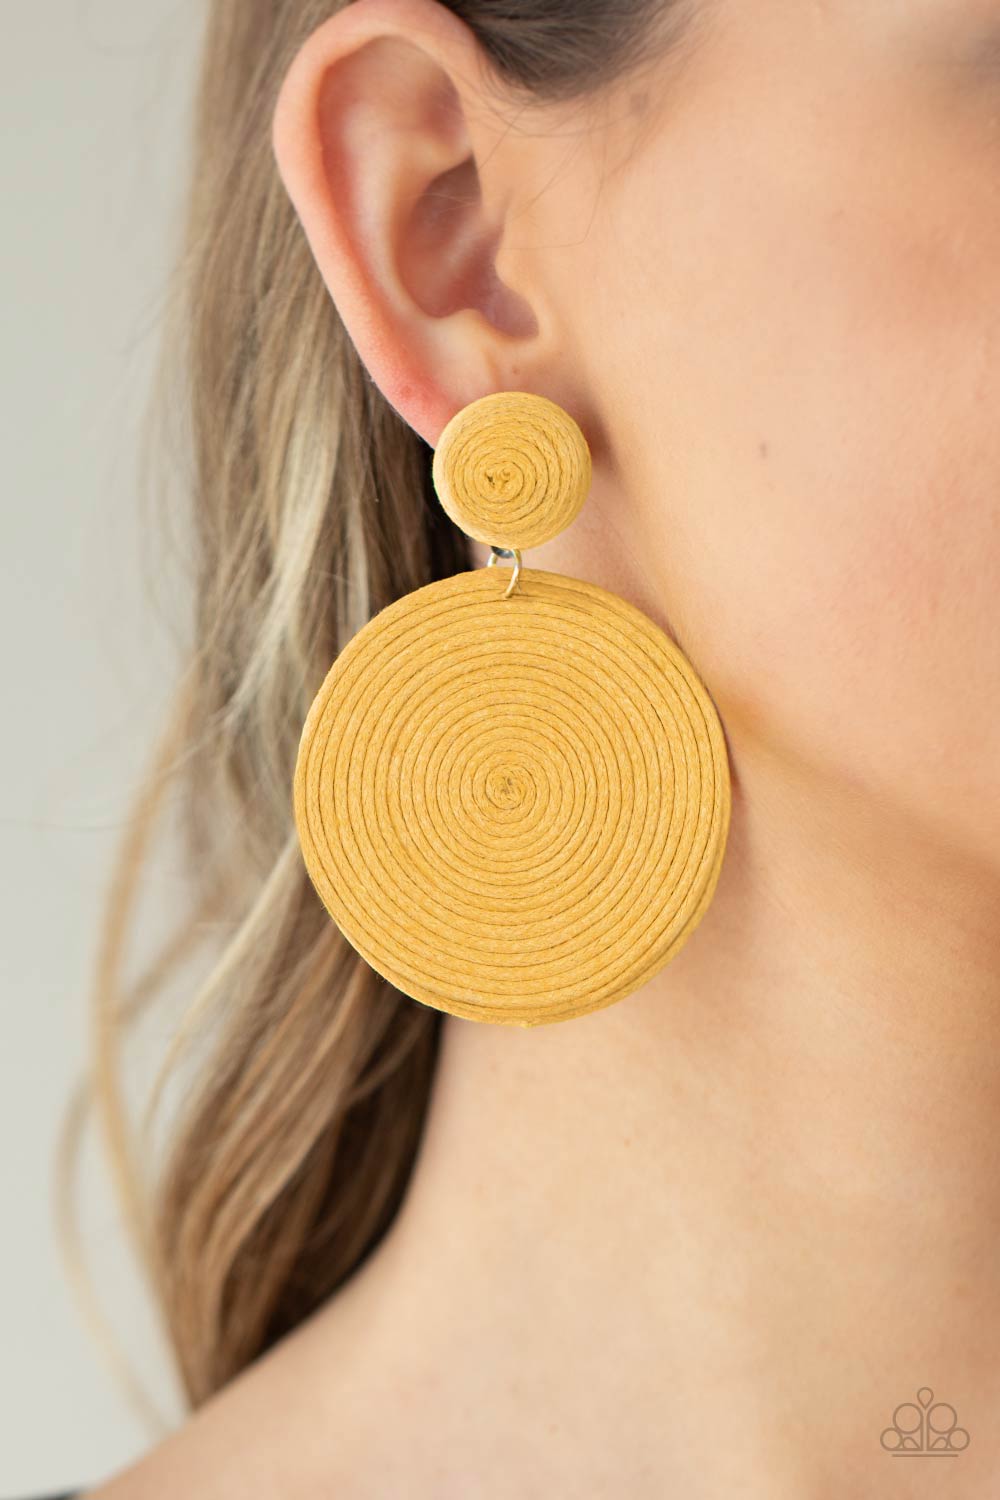 Circulate the Room - Yellow Earrings - Lady T Accessories